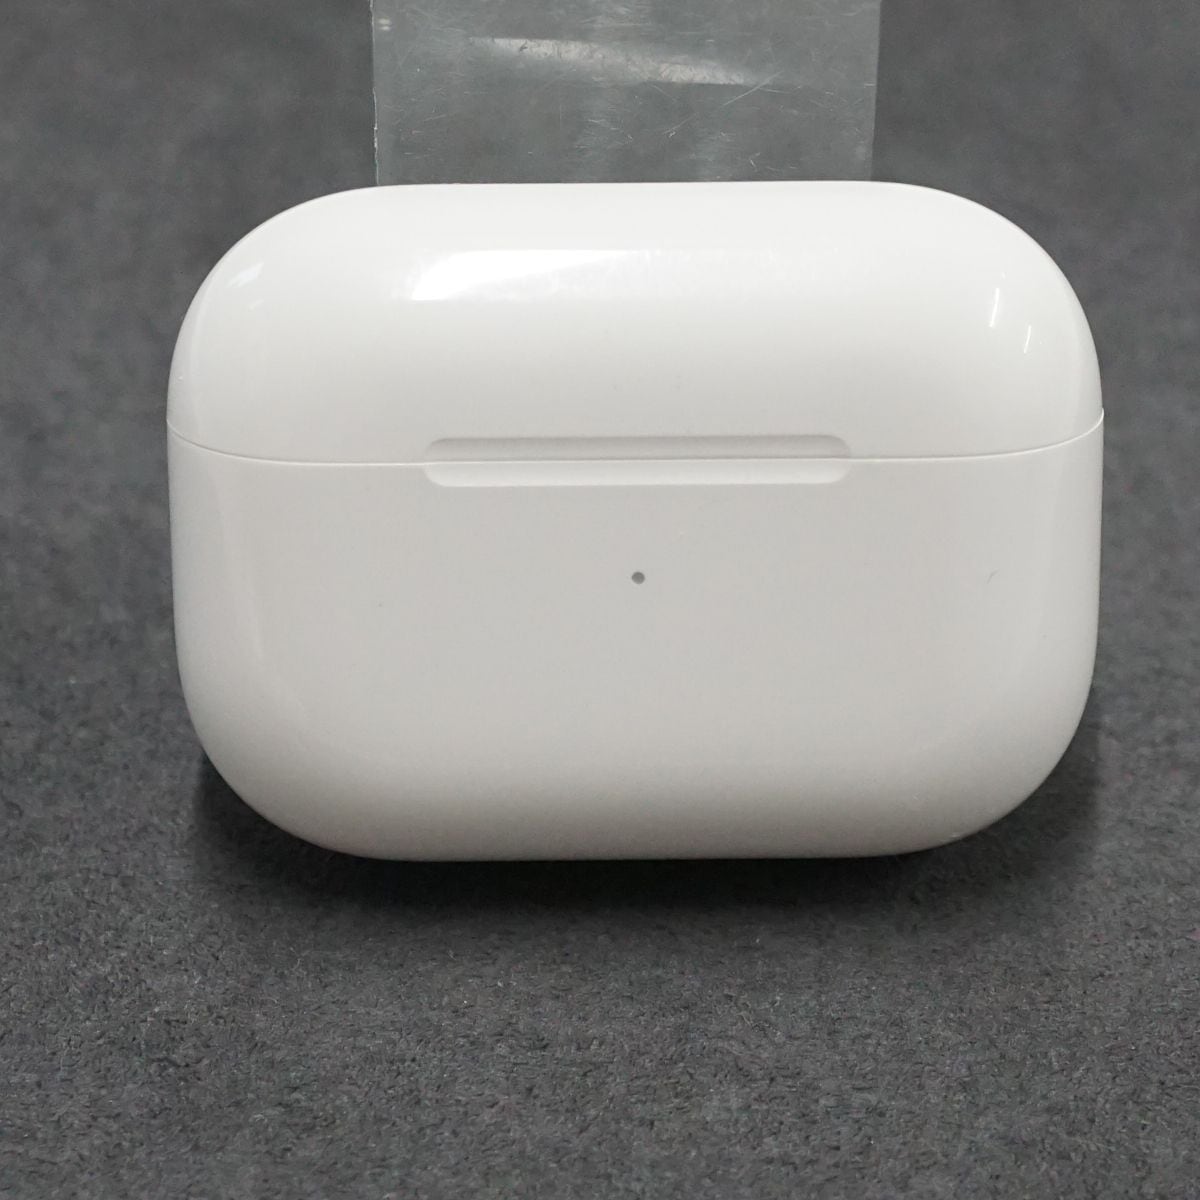 Apple AirPods 第1世代 充電ケース エアーポッズ 正規品 9 - イヤフォン